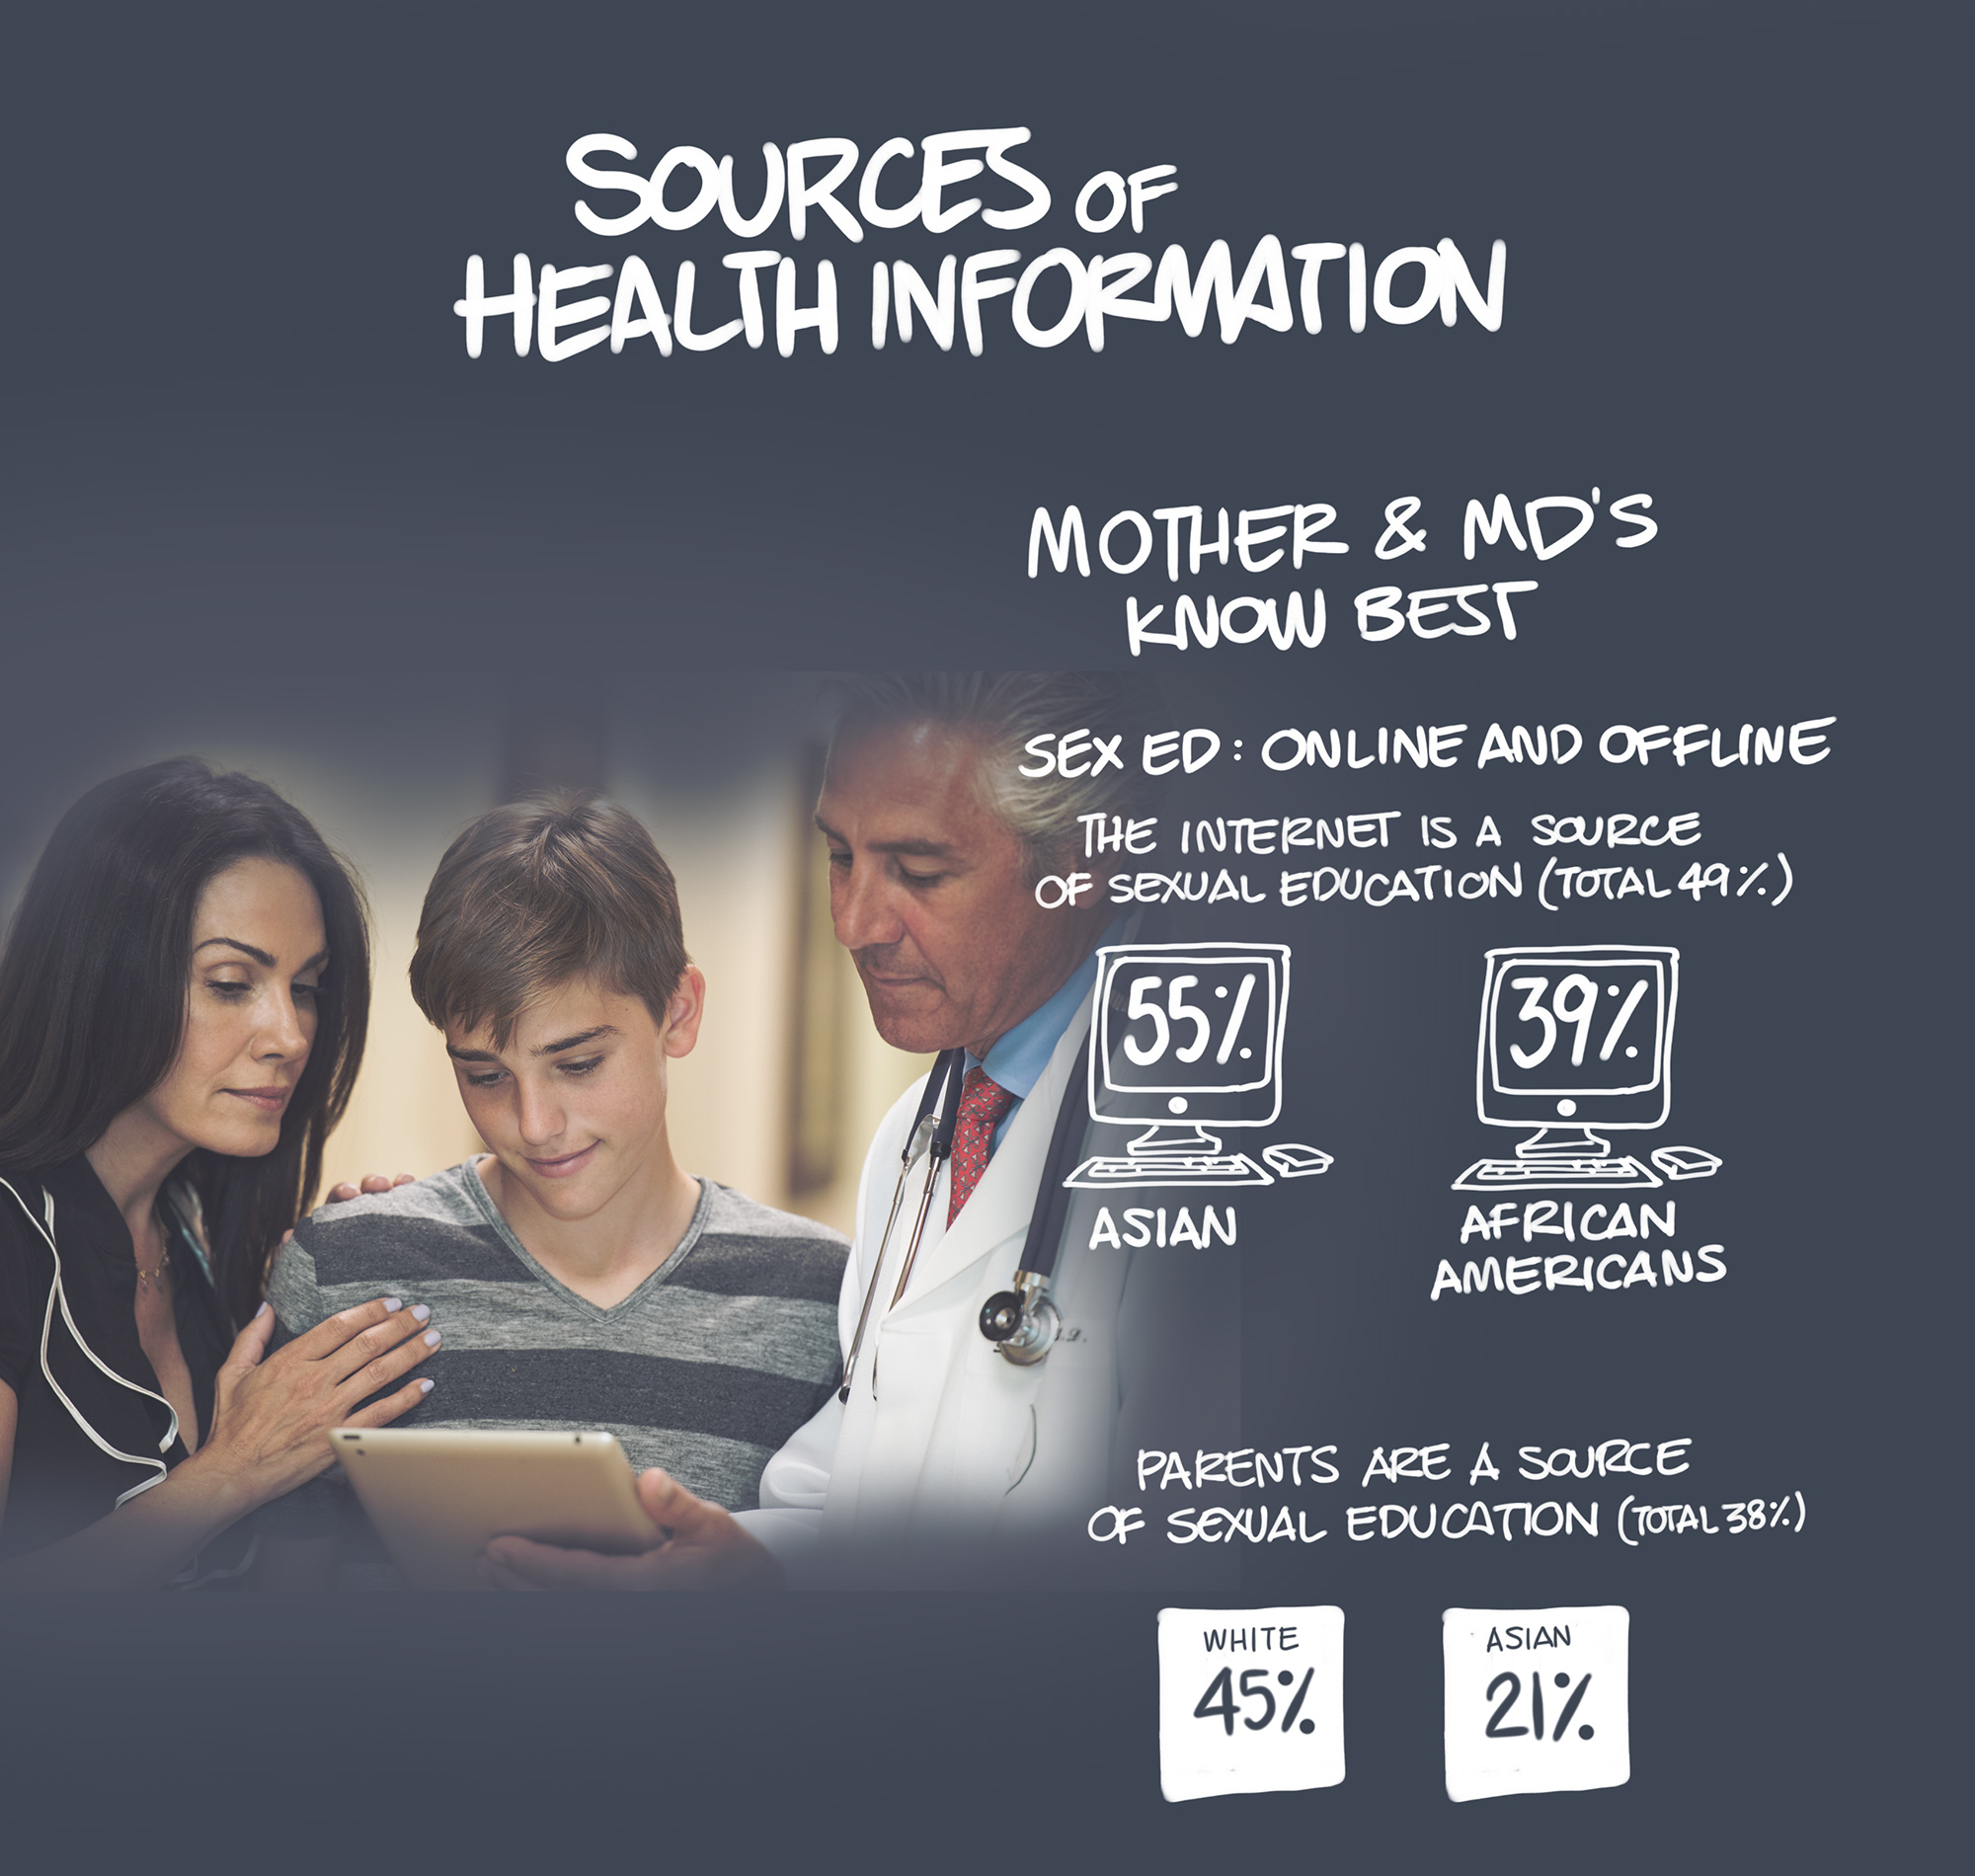 Sources of health information. Mother & MD's know best. Sex ed: online and offline. The internet is a source of sexual education (Total 49%). 55% Asian. 39% African Americans. Parents are a source of sexual education (Total 38%). 45% White. 21% Asian.